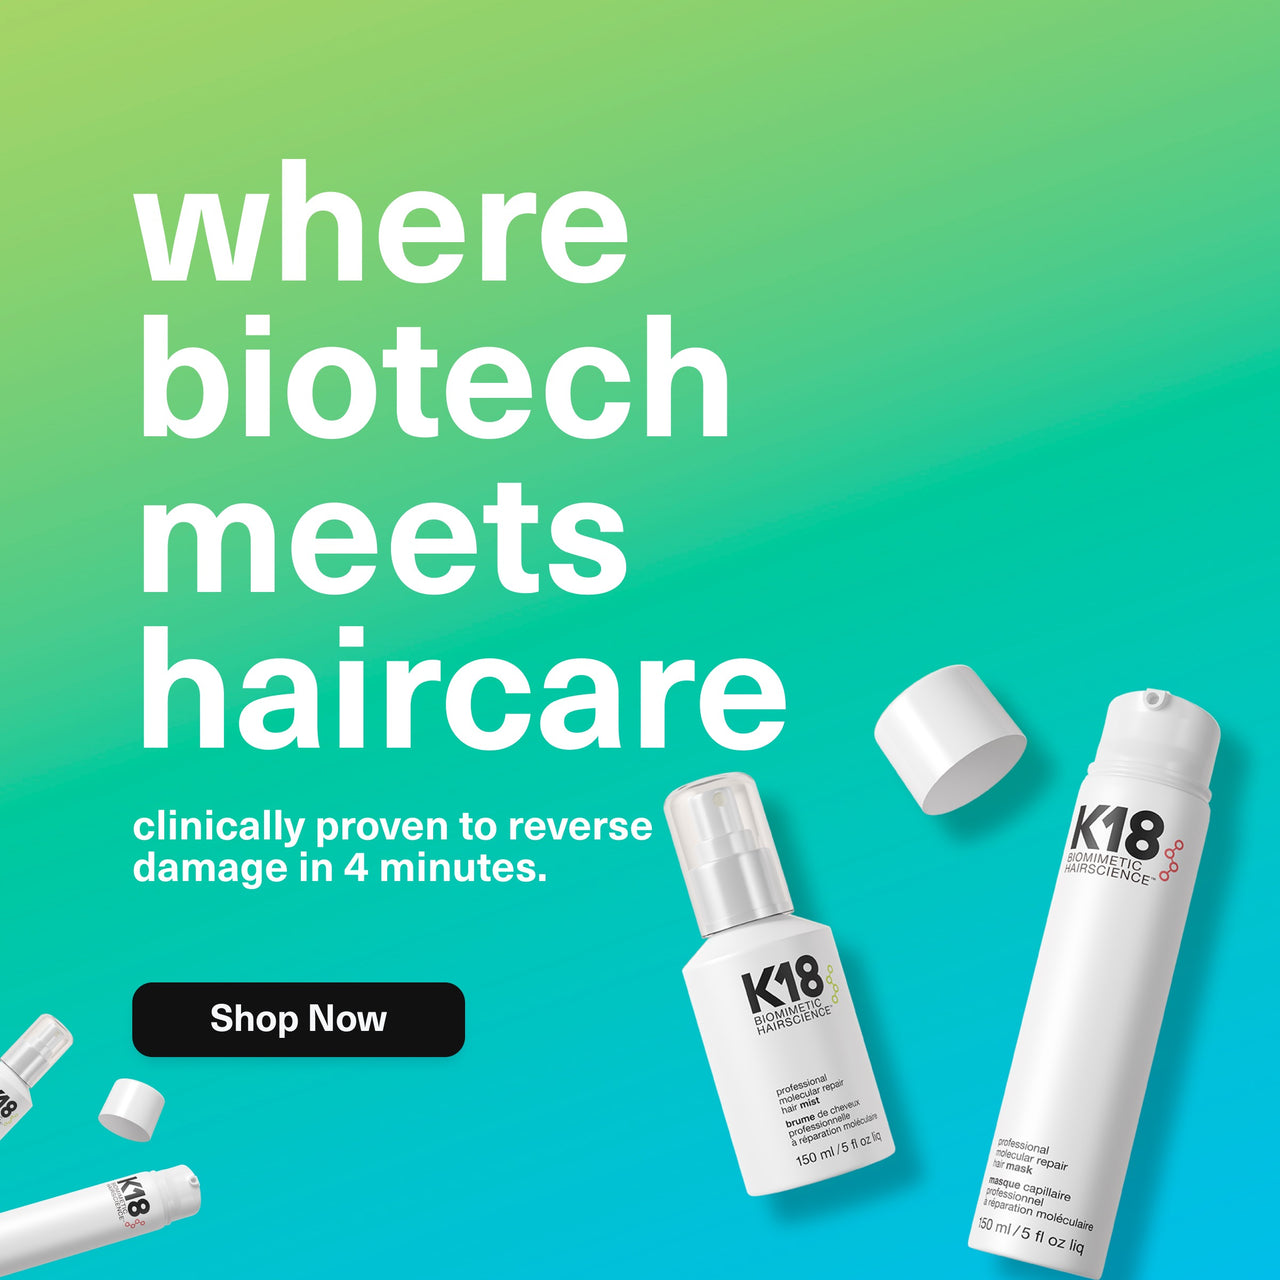 Where biotech meets haircare. Clinically proven to reverse damage in 4 minutes.